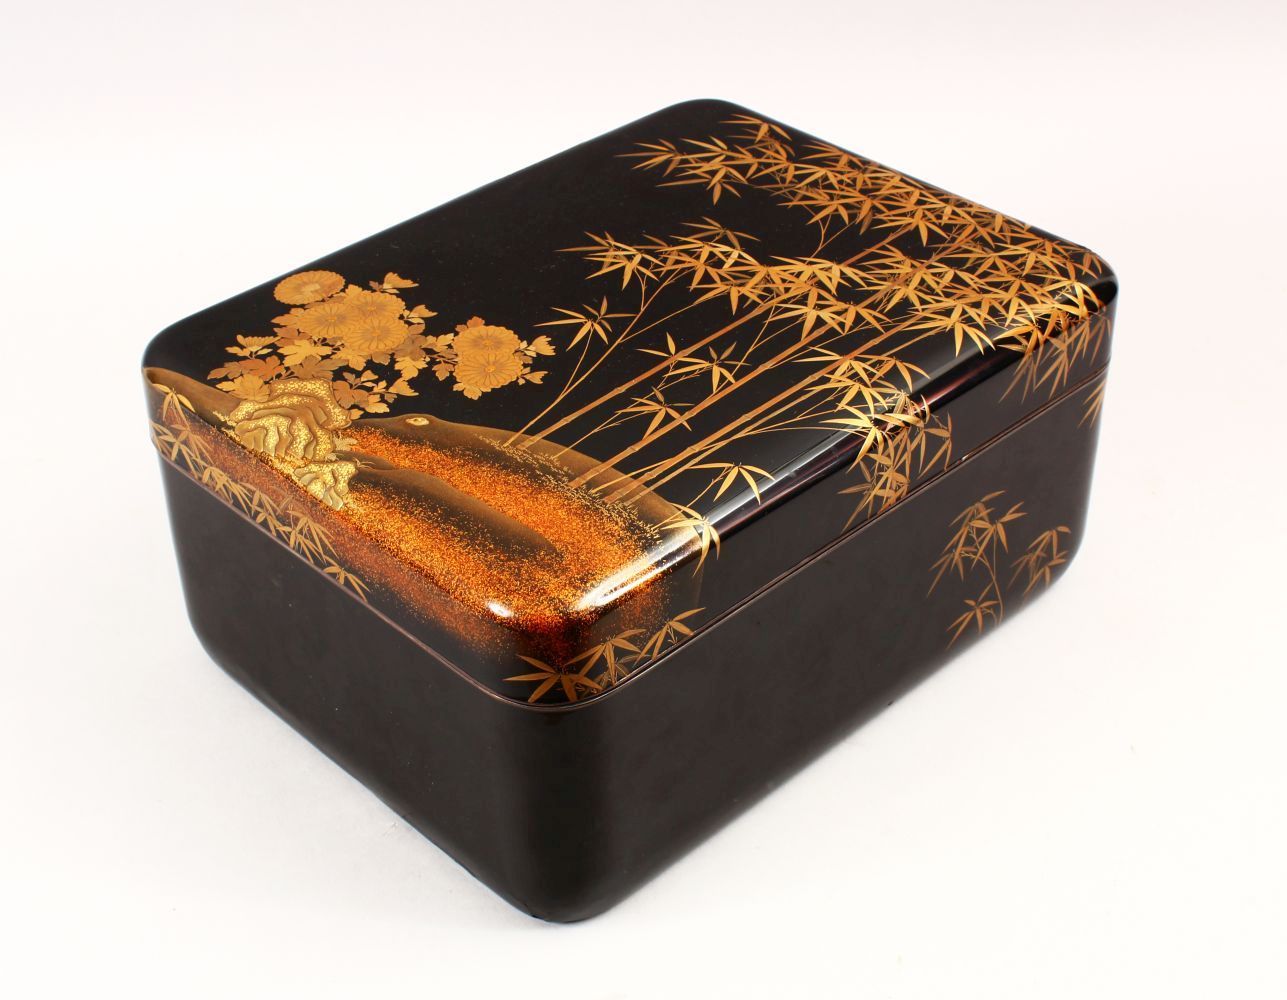 A GOOD JAPANESE MEIJI PERIOD LACQUER & GILT DECORATED LIDDED BOX the box decorated with gold lacquer